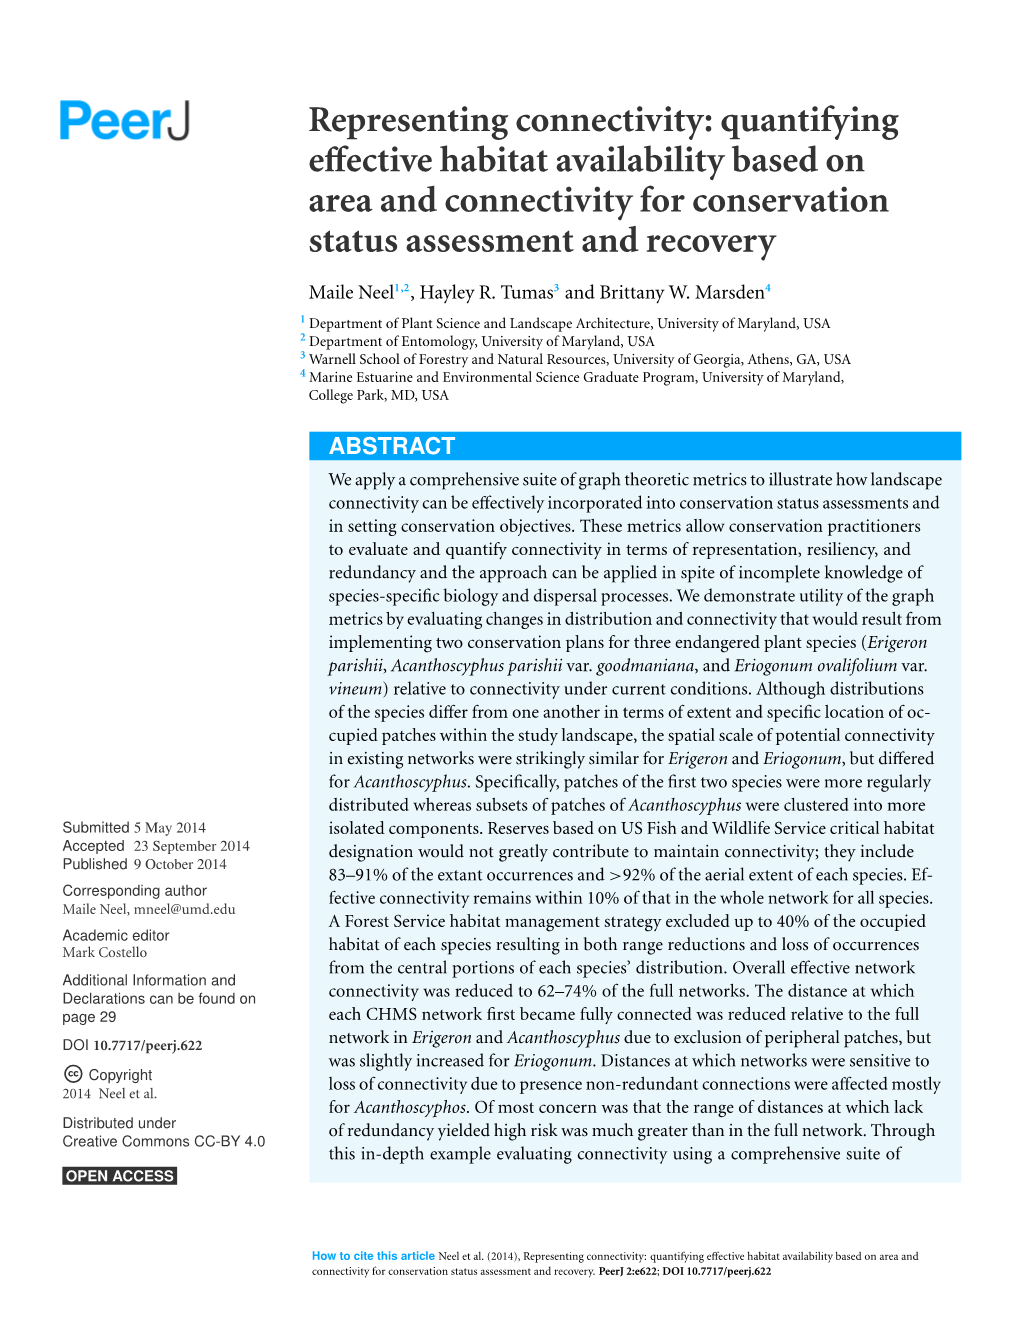 Representing Connectivity: Quantifying Effective Habitat Availability Based on Area and Connectivity for Conservation Status Assessment and Recovery